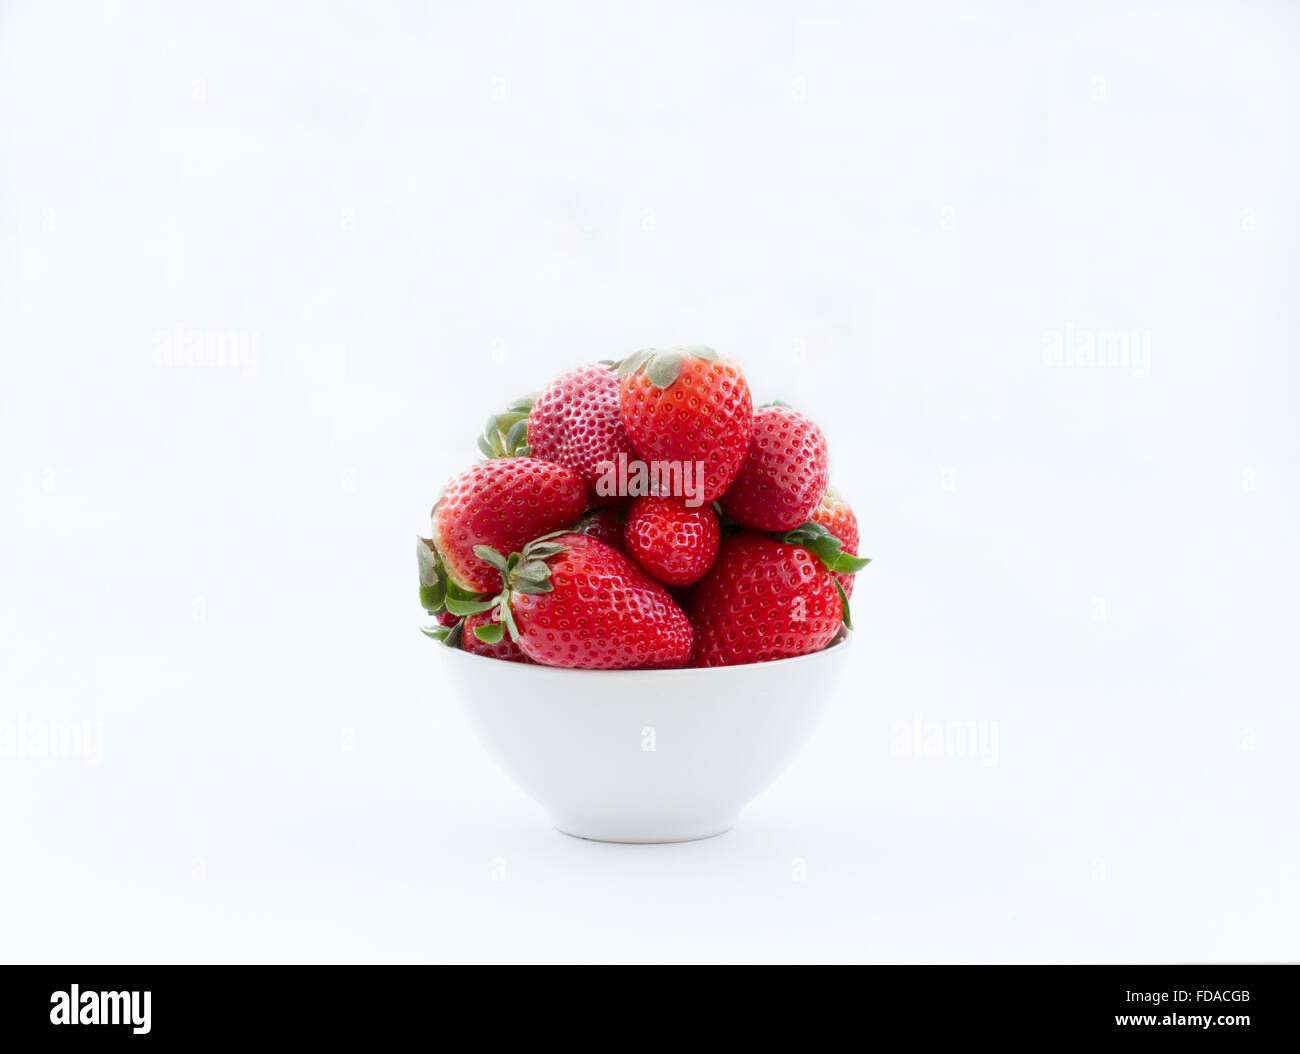 A bowl full of fresh strawberries on an isolated white background.  landscape orientation. Stock Photo